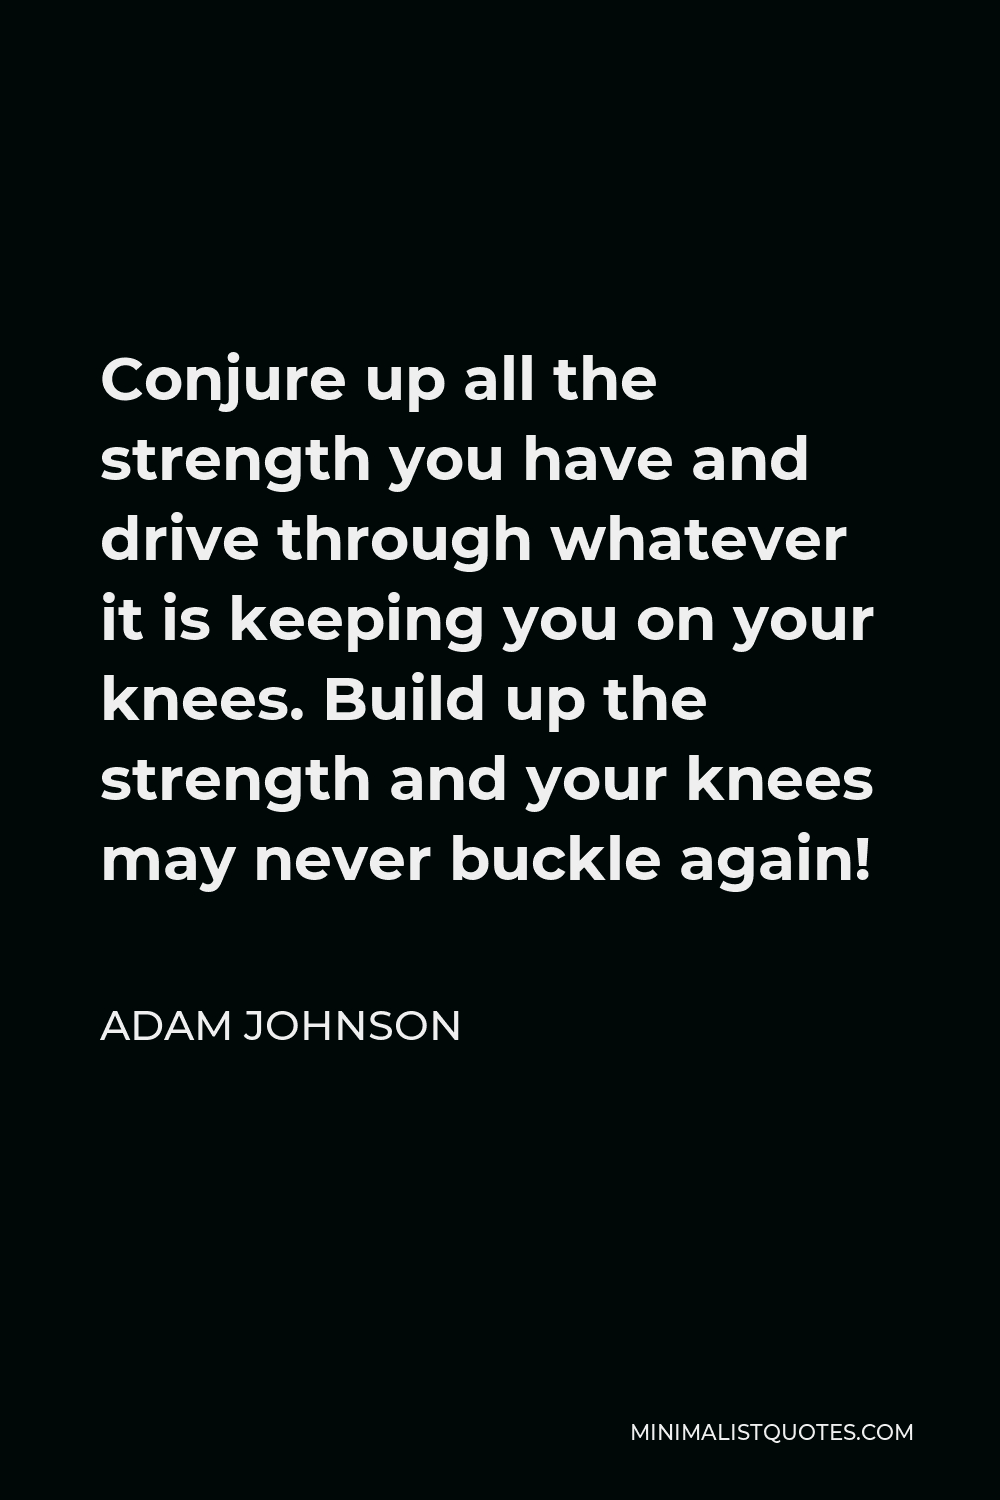 Adam Johnson Quote - Conjure up all the strength you have and drive through whatever it is keeping you on your knees. Build up the strength and your knees may never buckle again!